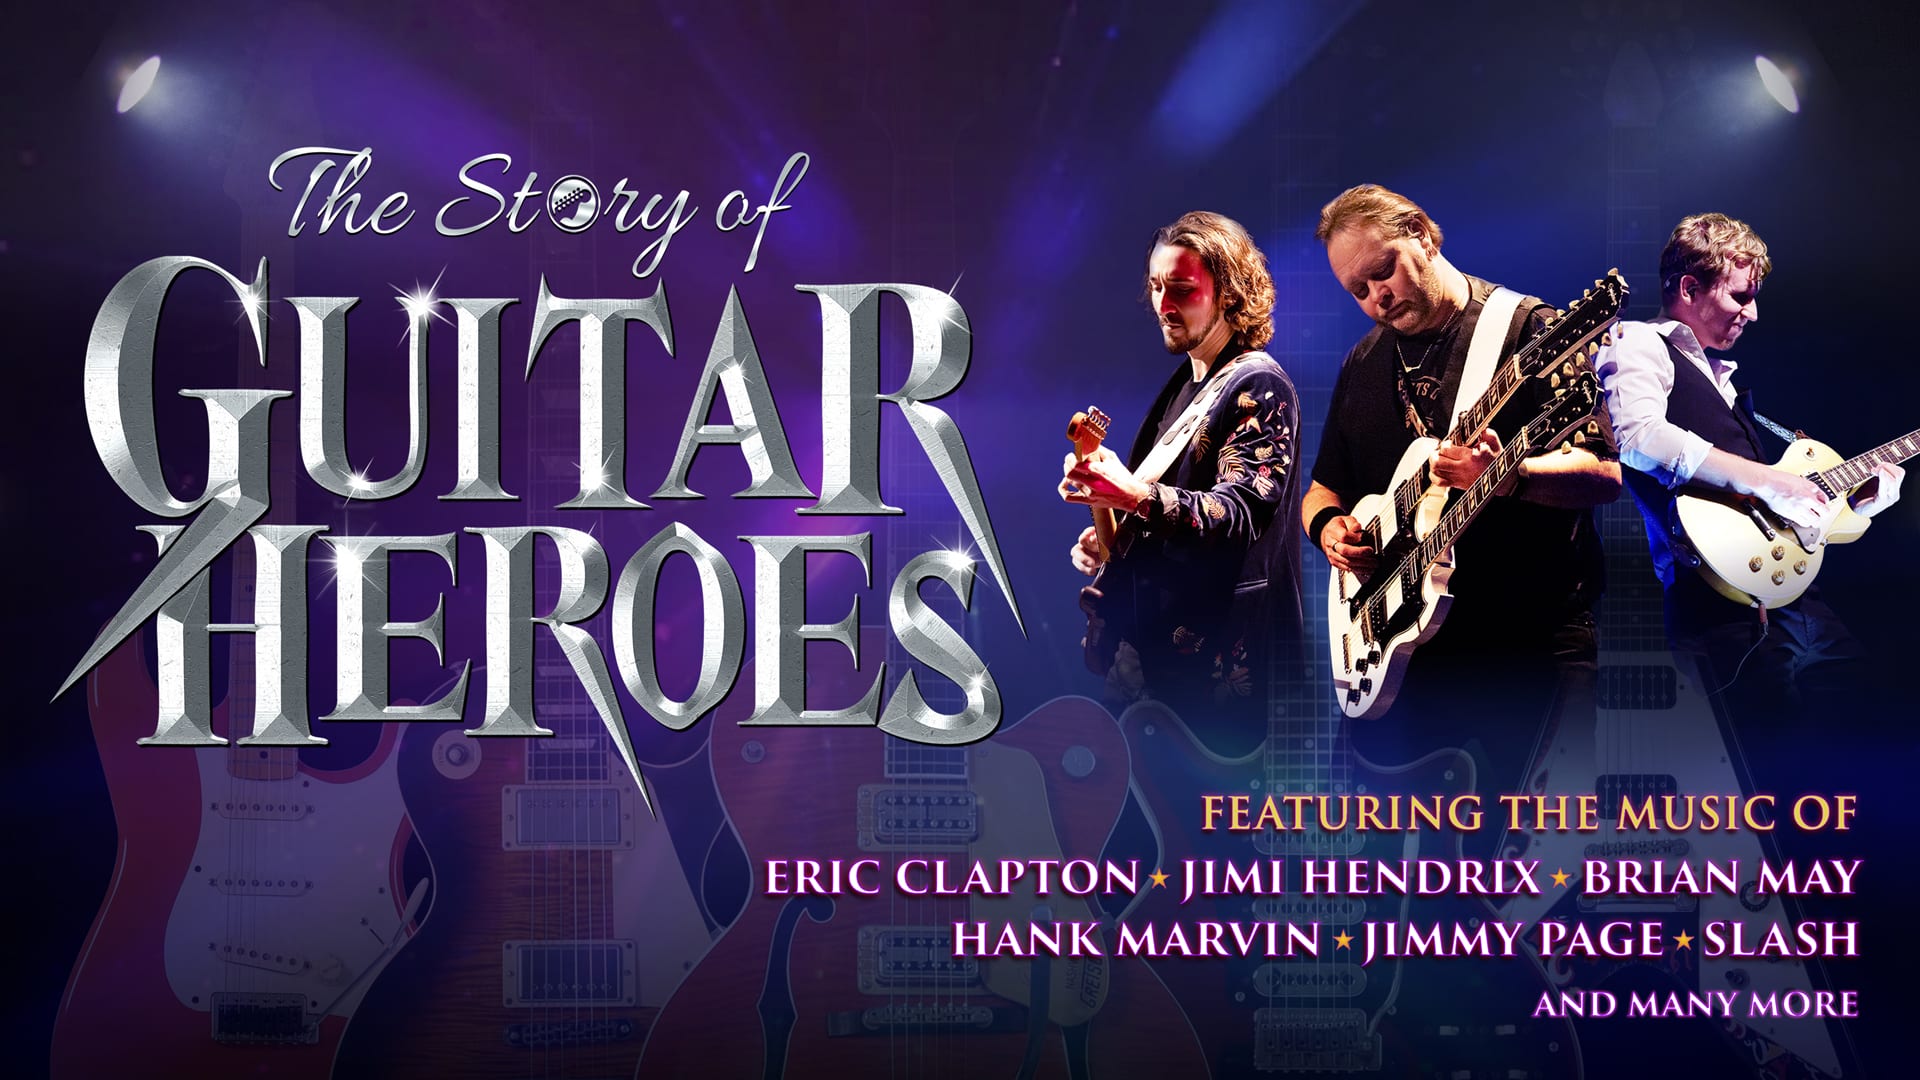 The Story of Guitar Heroes promotional artwork - On the left: Shiny, silver text that looks as if it's made from blades, reads: The Story of Guitar Heroes. On the right: Three guitarists mid-performance. Underneath, text reads: Featuring the music of Eric Clapton, Jimi Hendrix, Brian May, Hank Marvin, Jimmy Page, Slash and many more. In the background, five electric guitars lined up with stage lights shining from above.